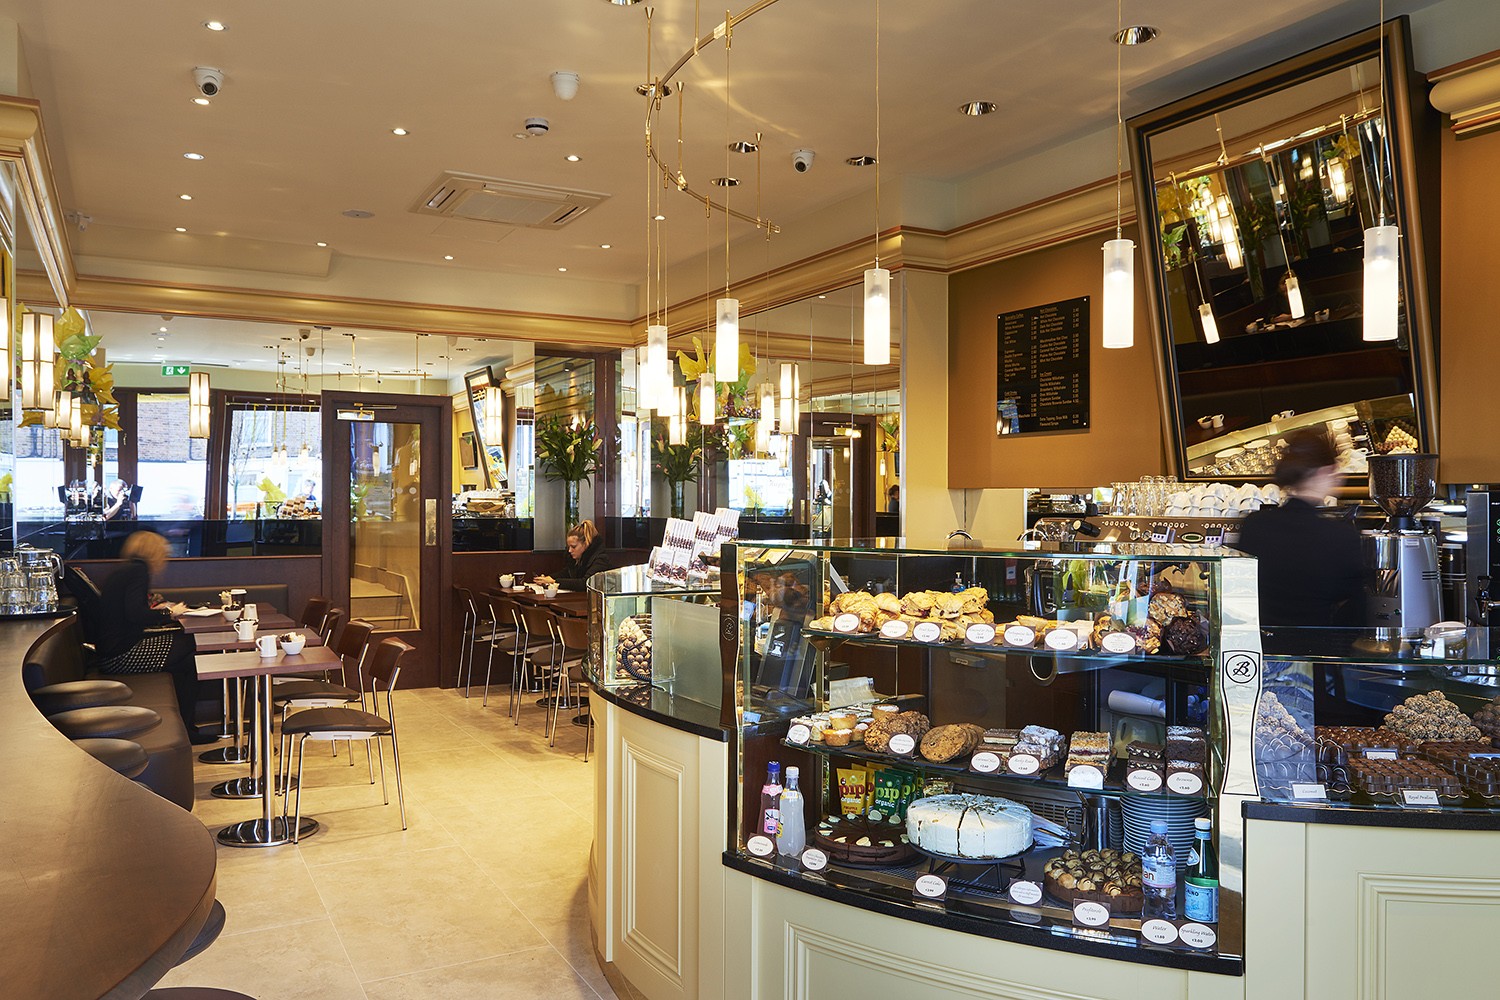 Butlers Chocolates Gallery -1